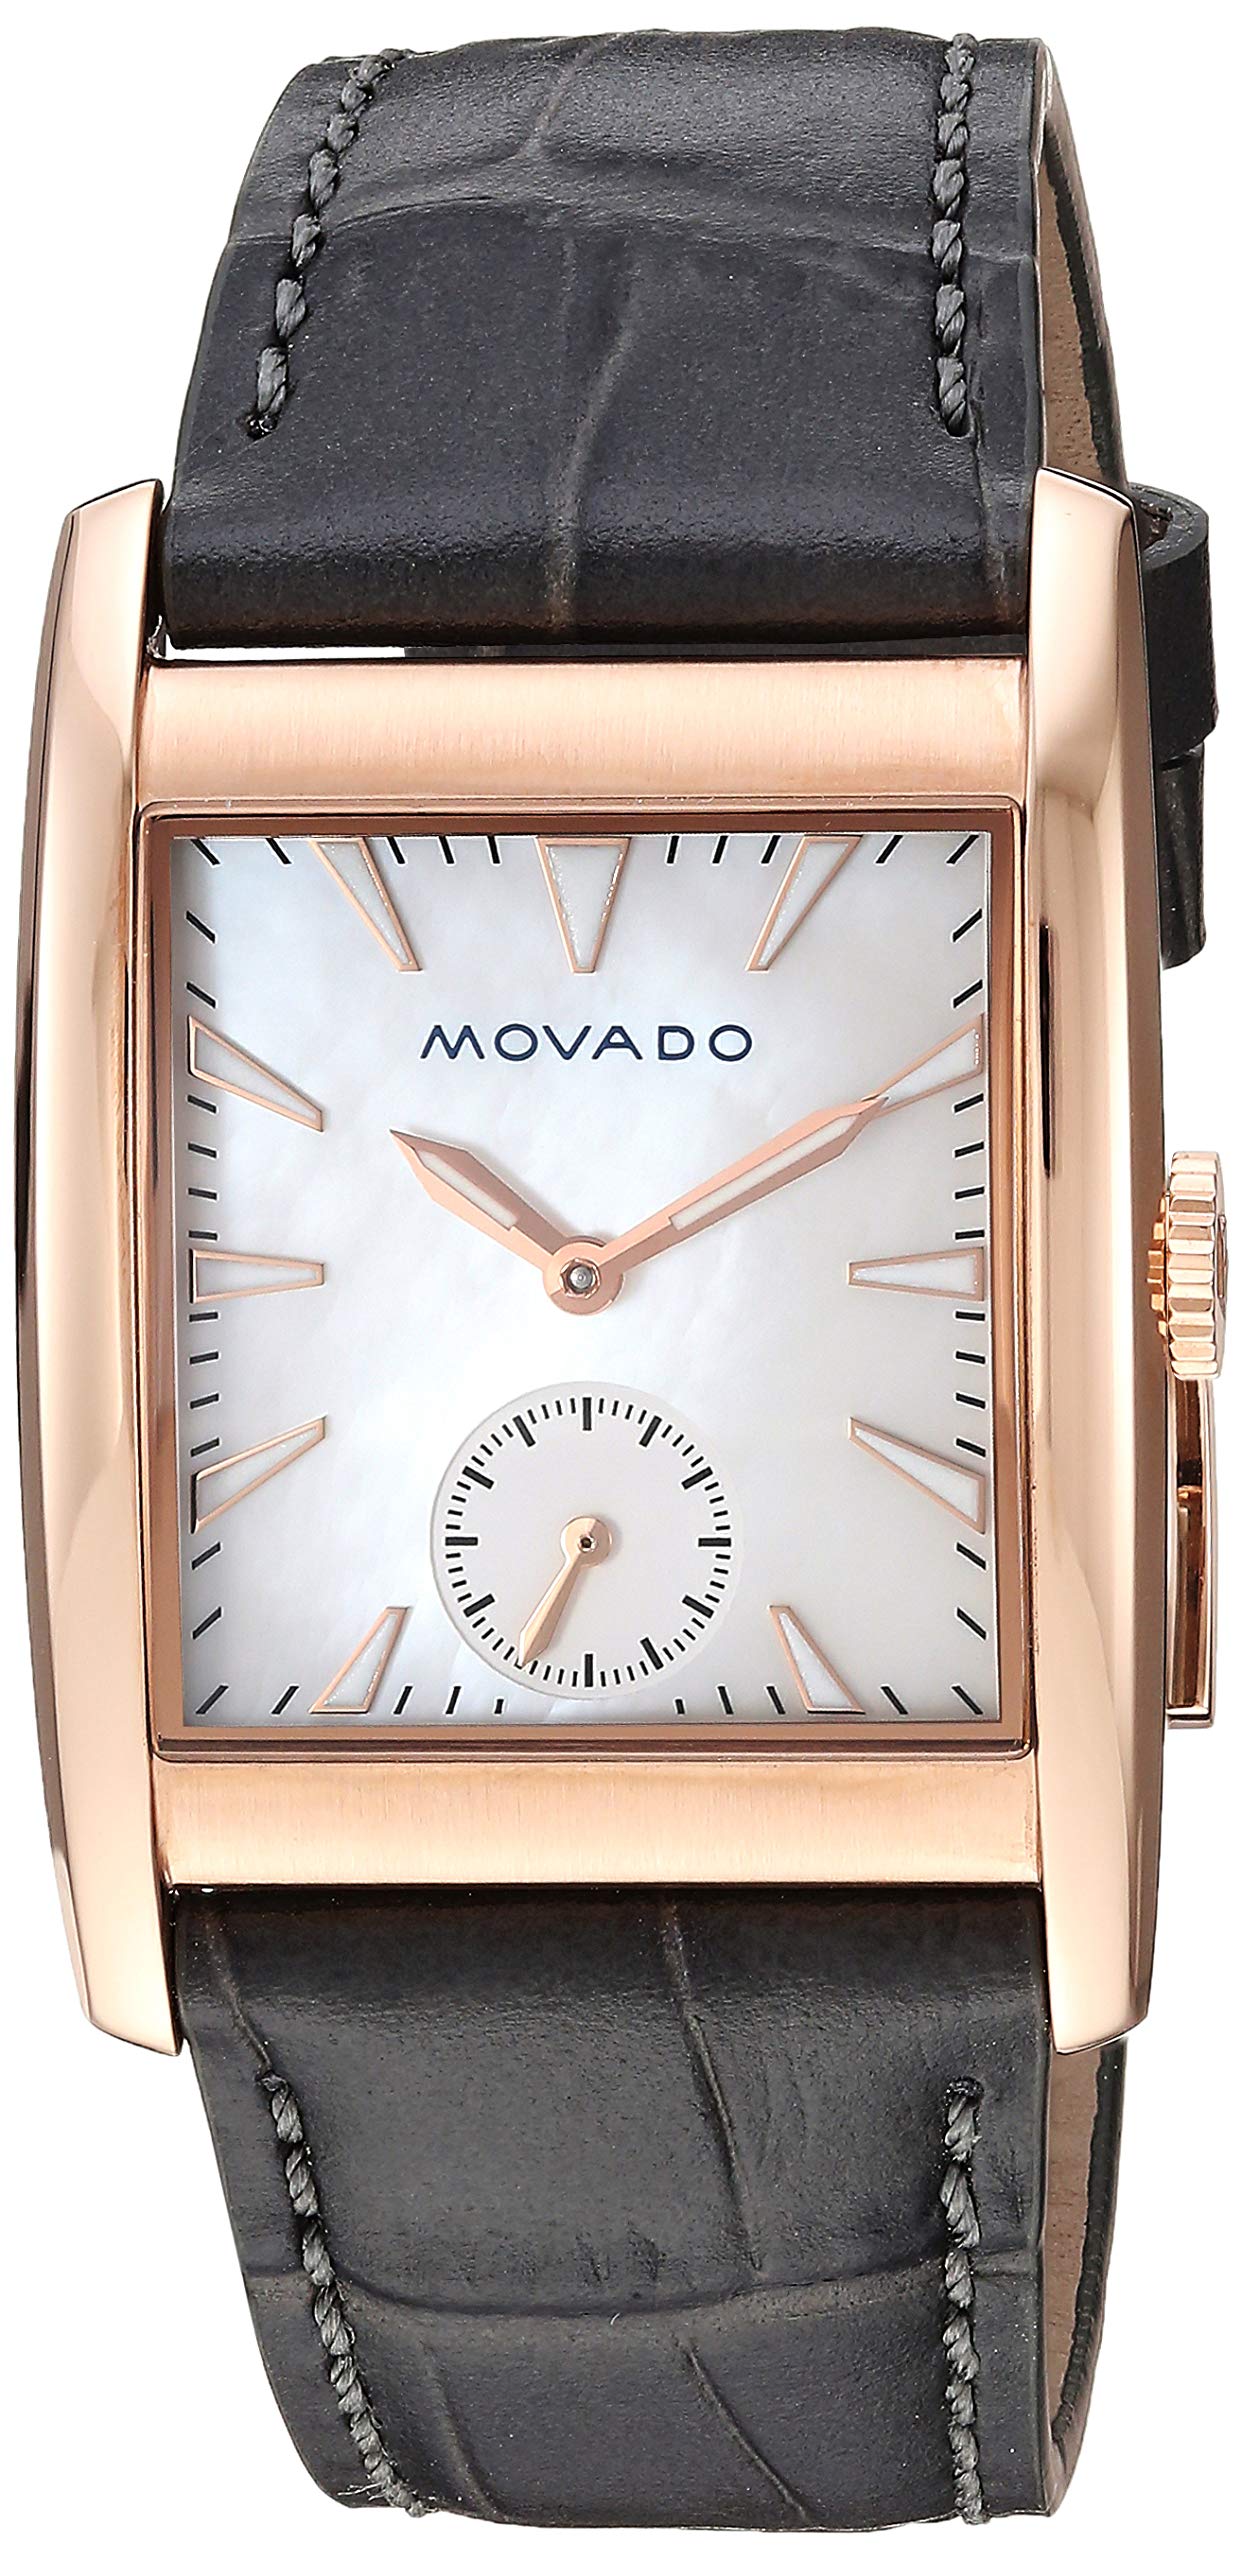 Movado Heritage White Mother of Pearl Dial Grey Leather Strap Watch For Women - 3650051